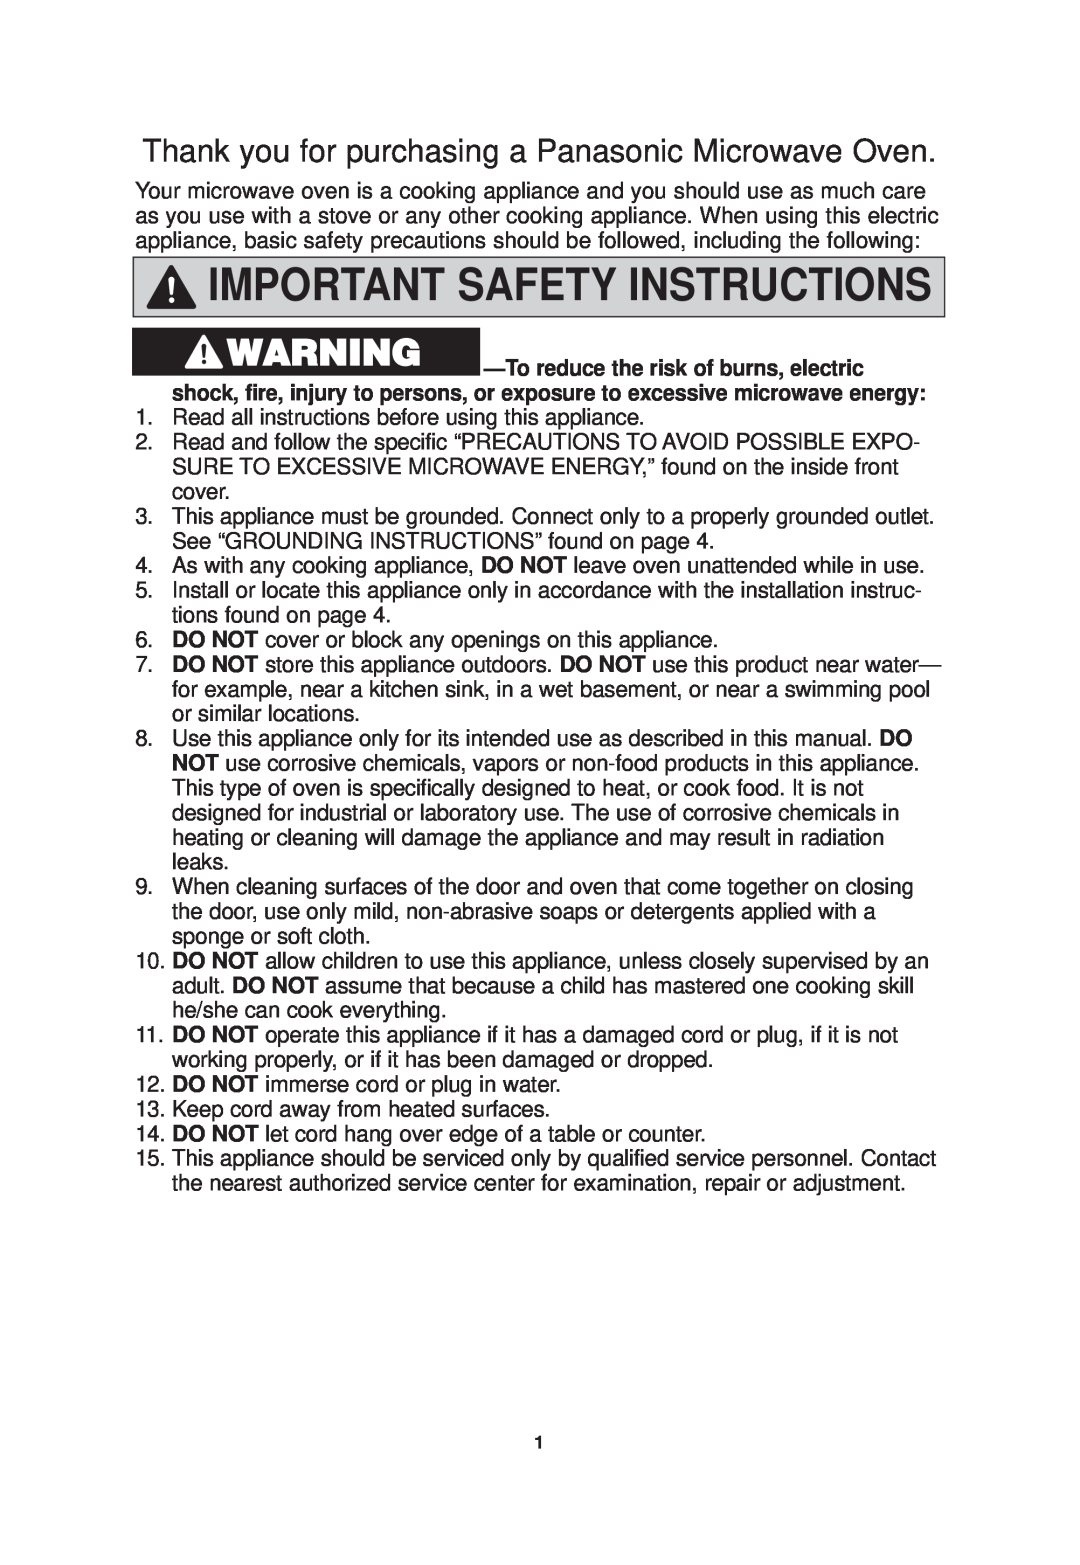 Panasonic NN-SN968 Important Safety Instructions, Thank you for purchasing a Panasonic Microwave Oven 